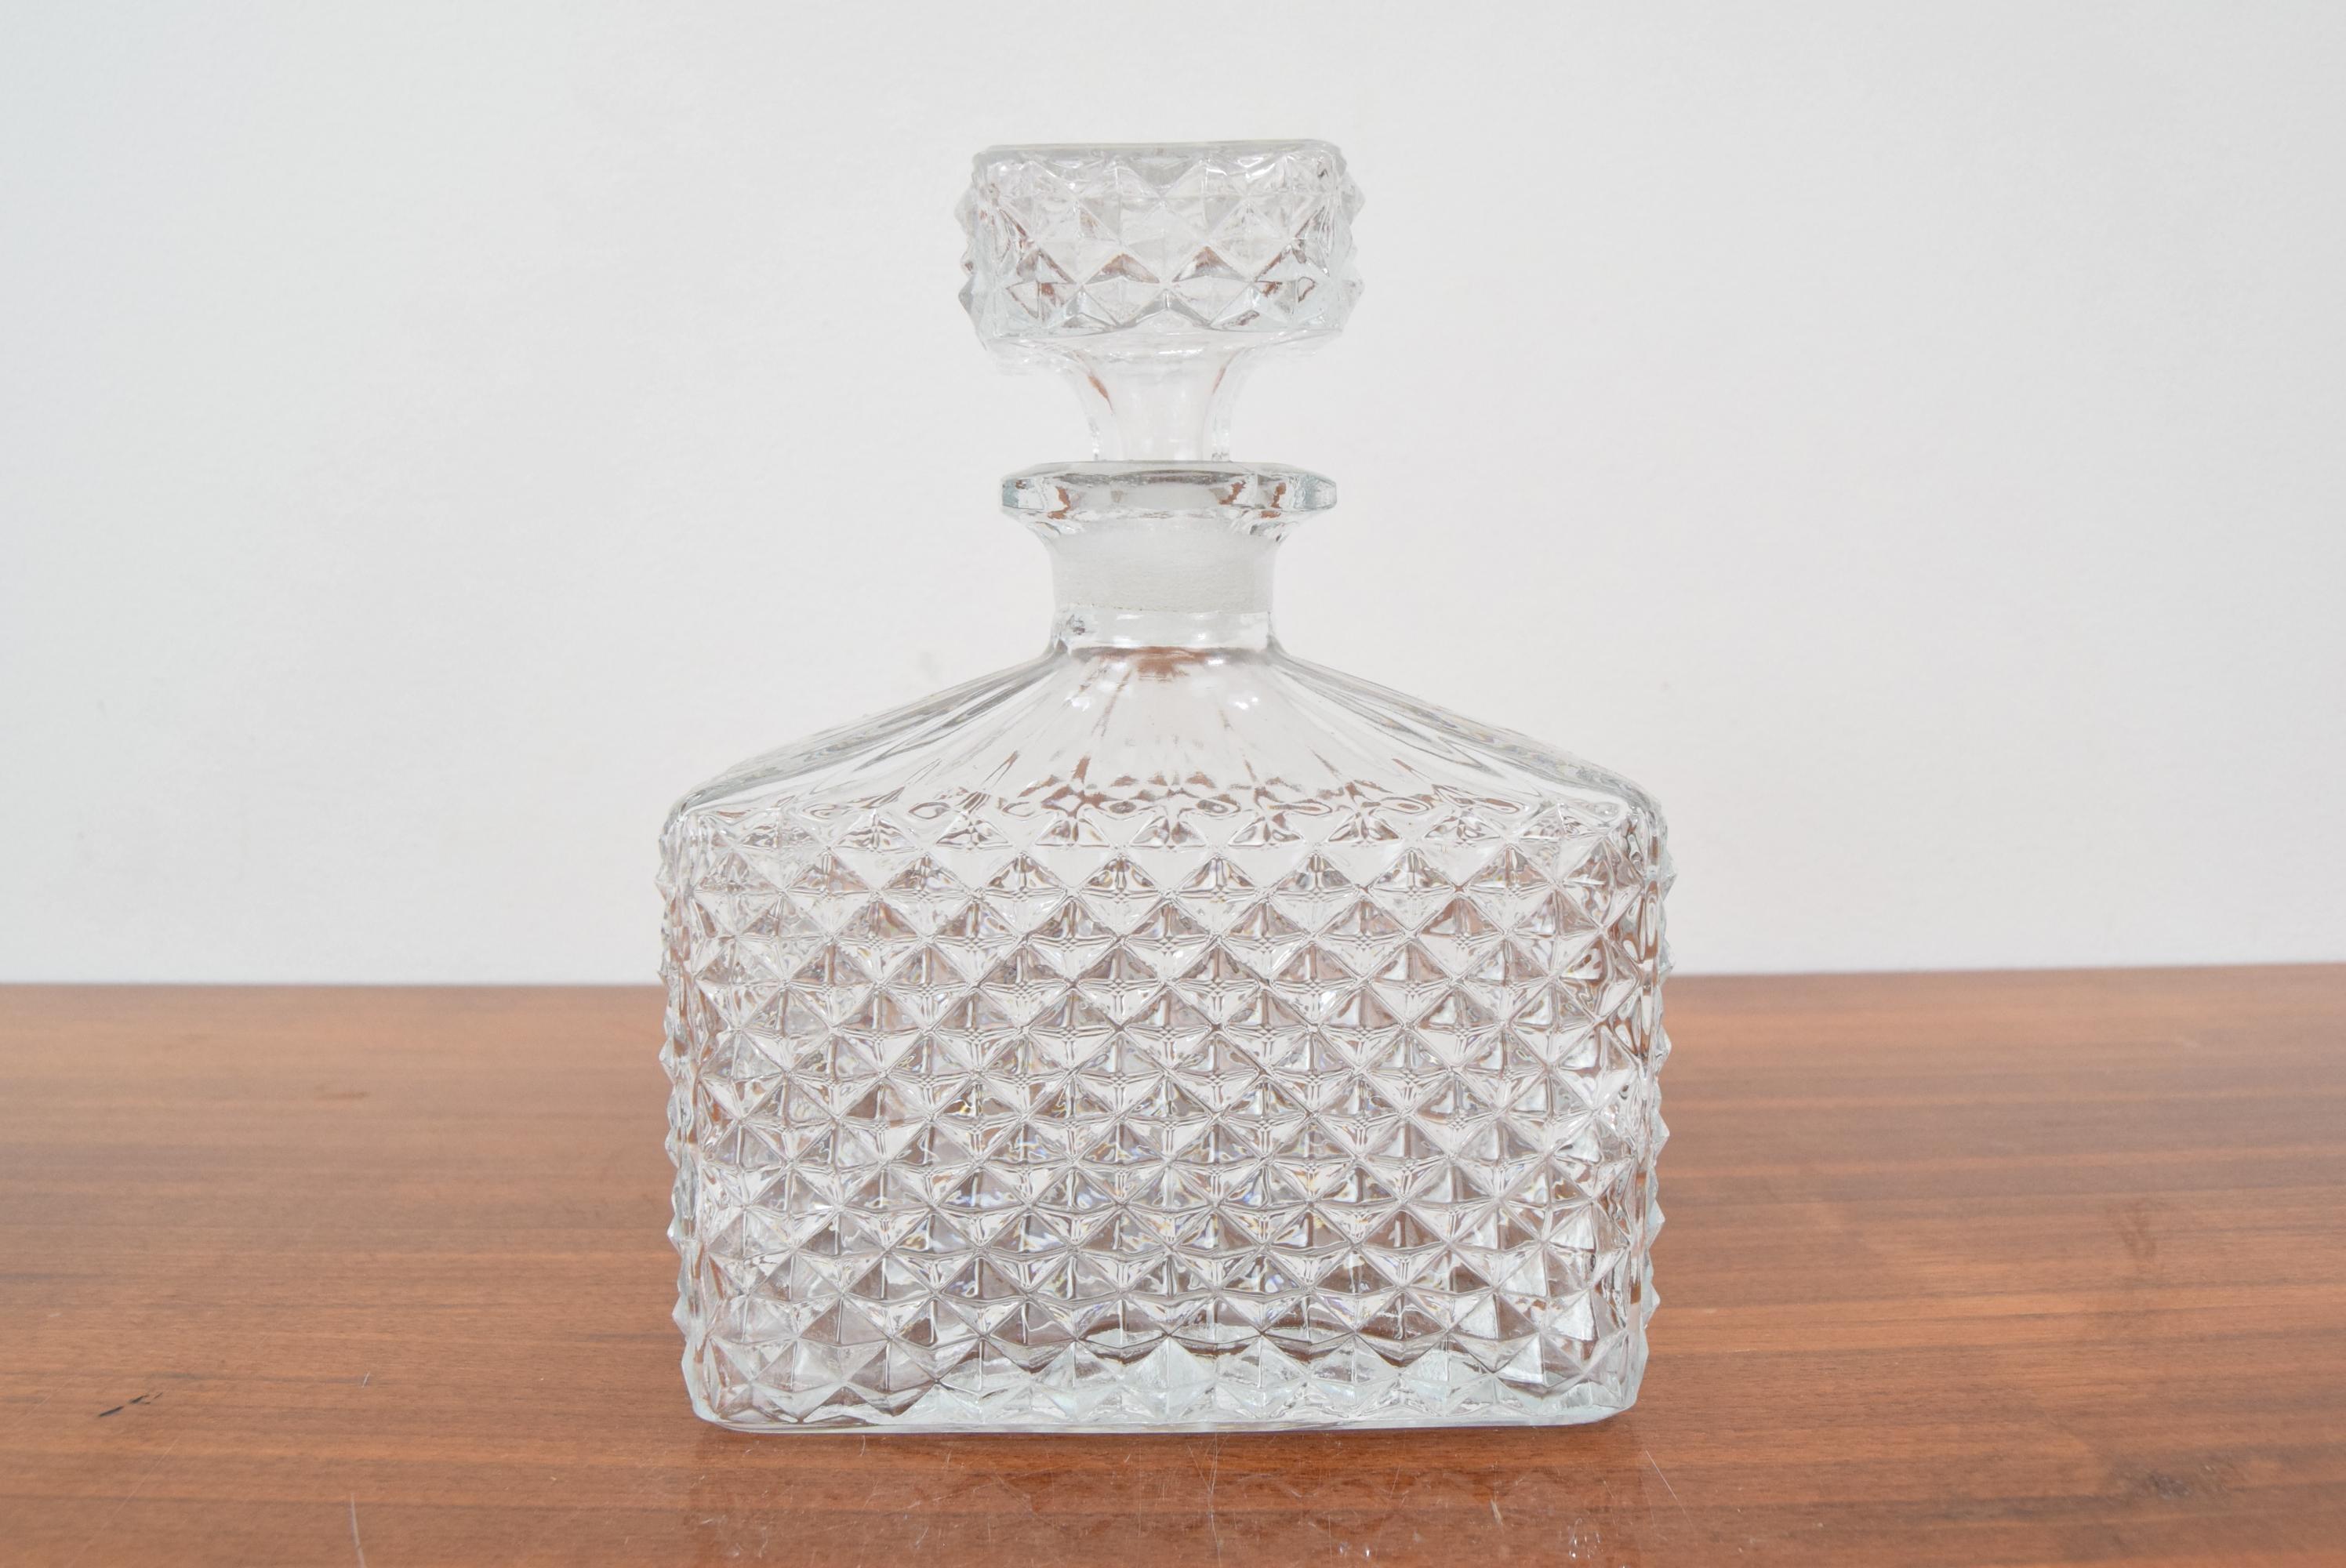 Made in Czechoslovakia.
Made of crystal glass.
Re-polished.
Good original condition.